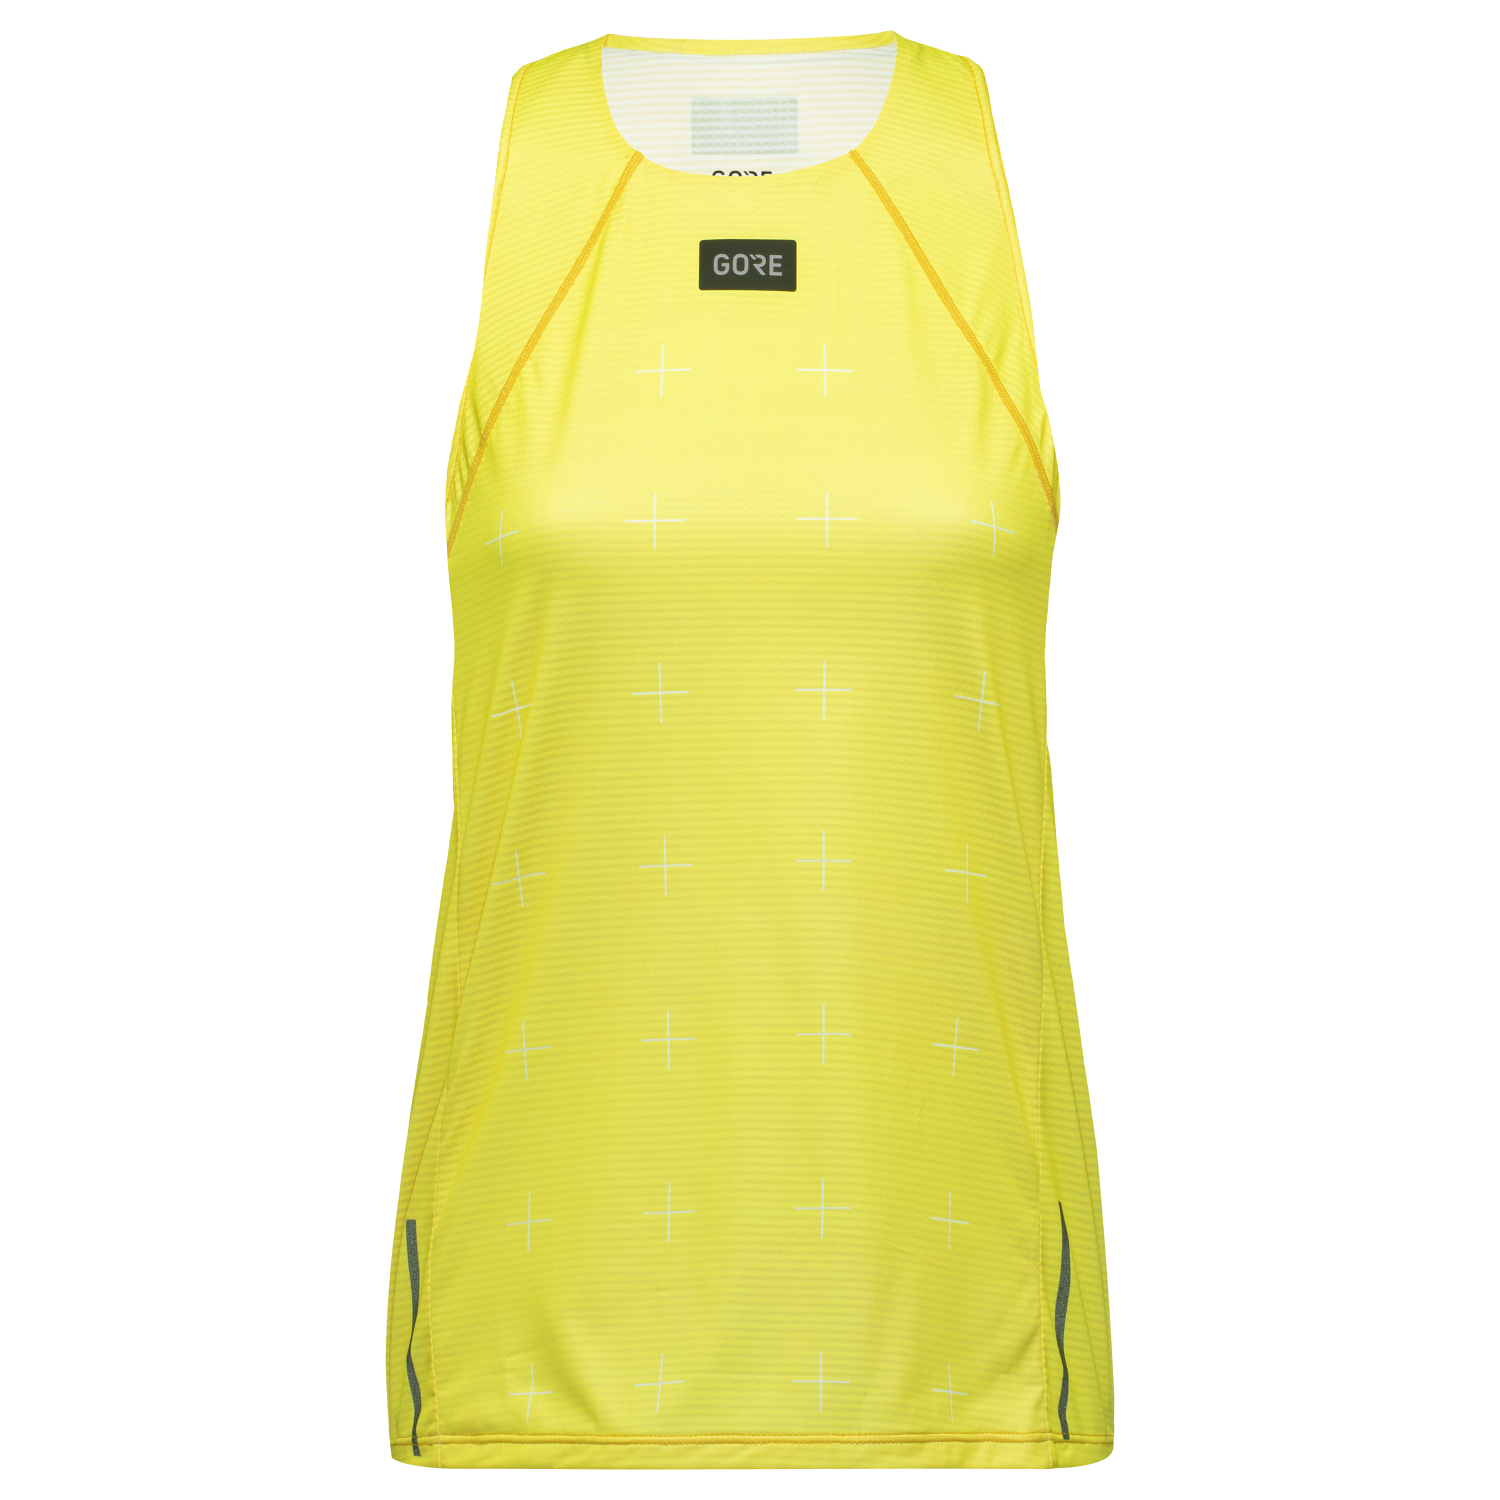 GOREWEAR Contest Daily Running Singlet Women's in Washed Neon Yellow | XS (0-2) | Slim fit